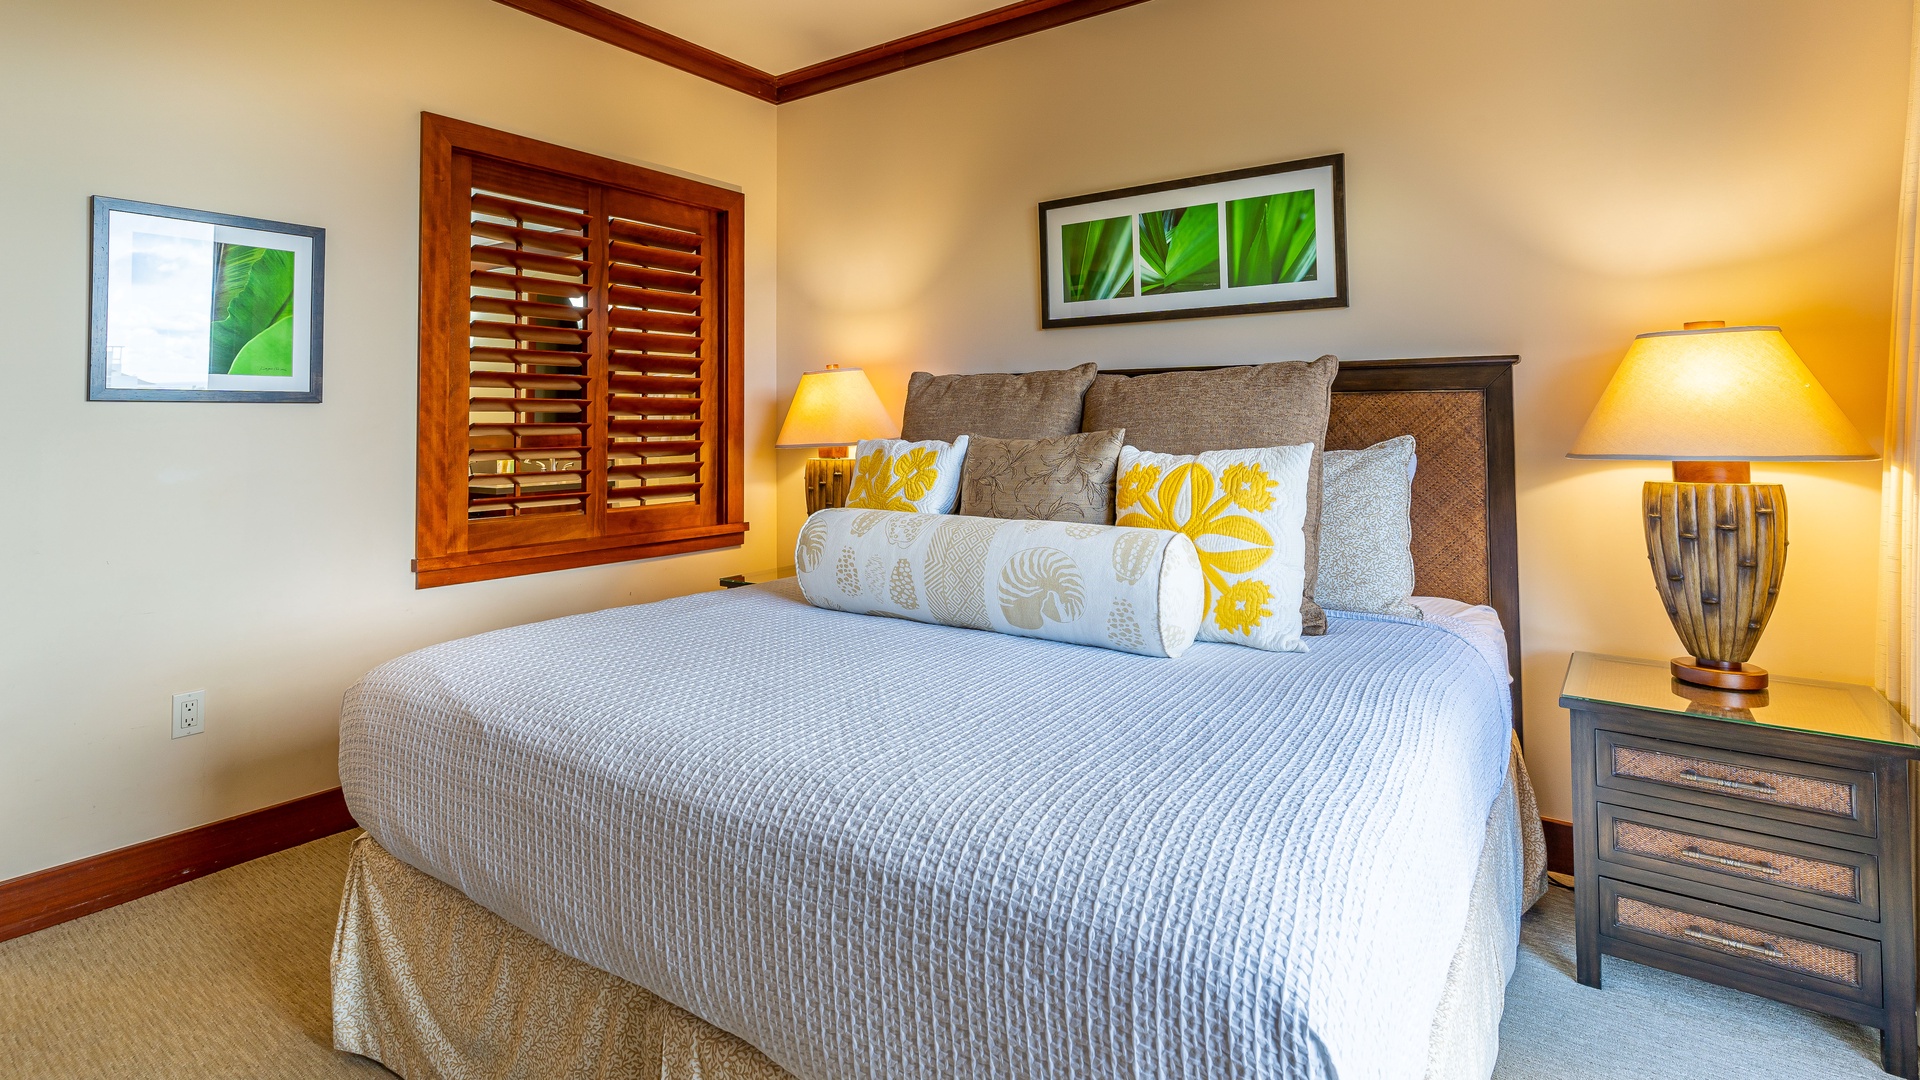 Kapolei Vacation Rentals, Ko Olina Beach Villas B706 - The primary guest bedroom where you will rest peacefully.